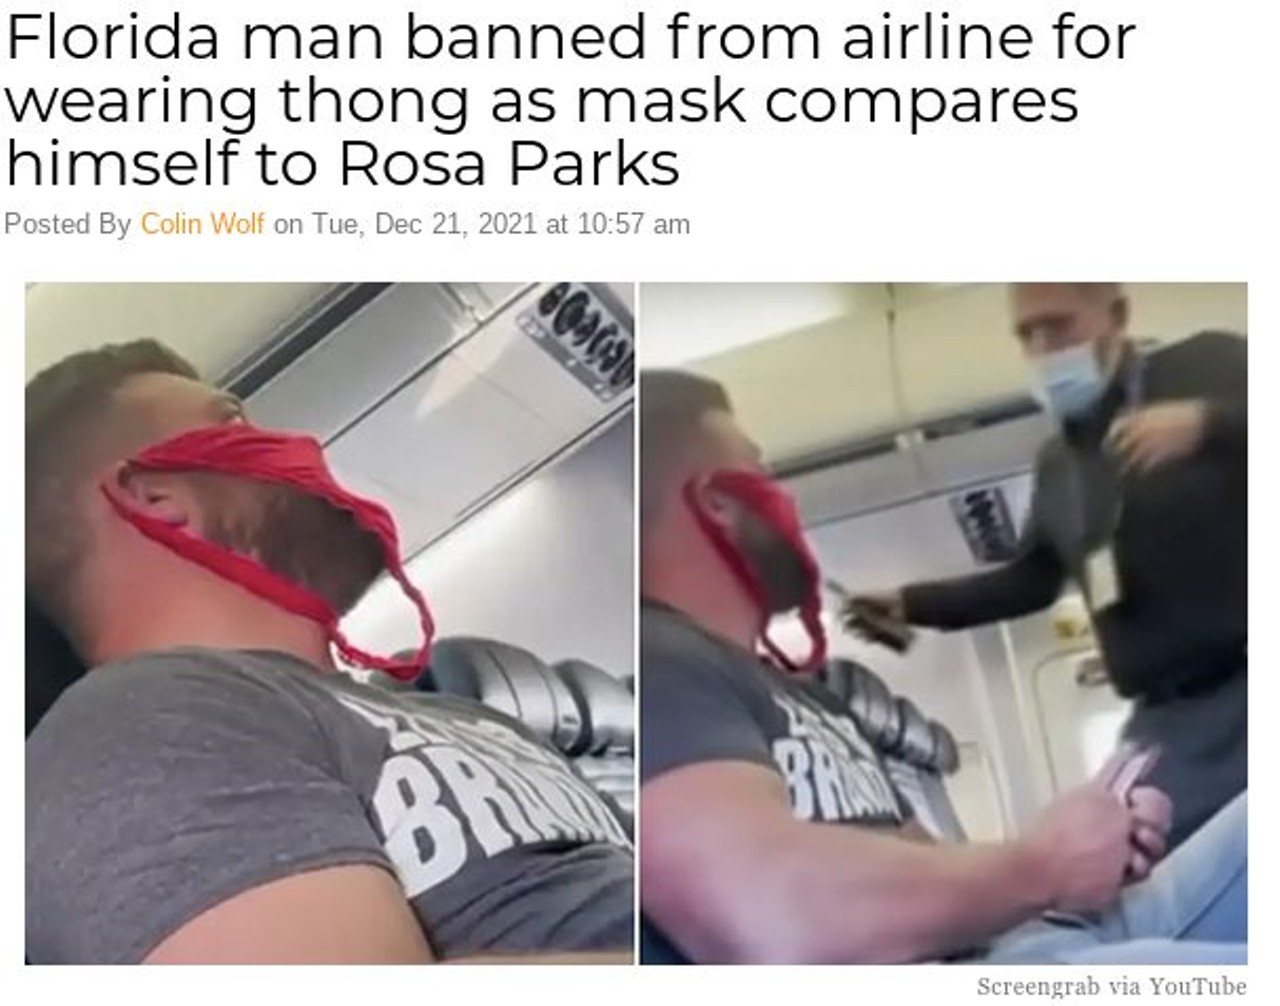 Florida man banned from airline for wearing thong as mask compares himself to Rosa Parks
